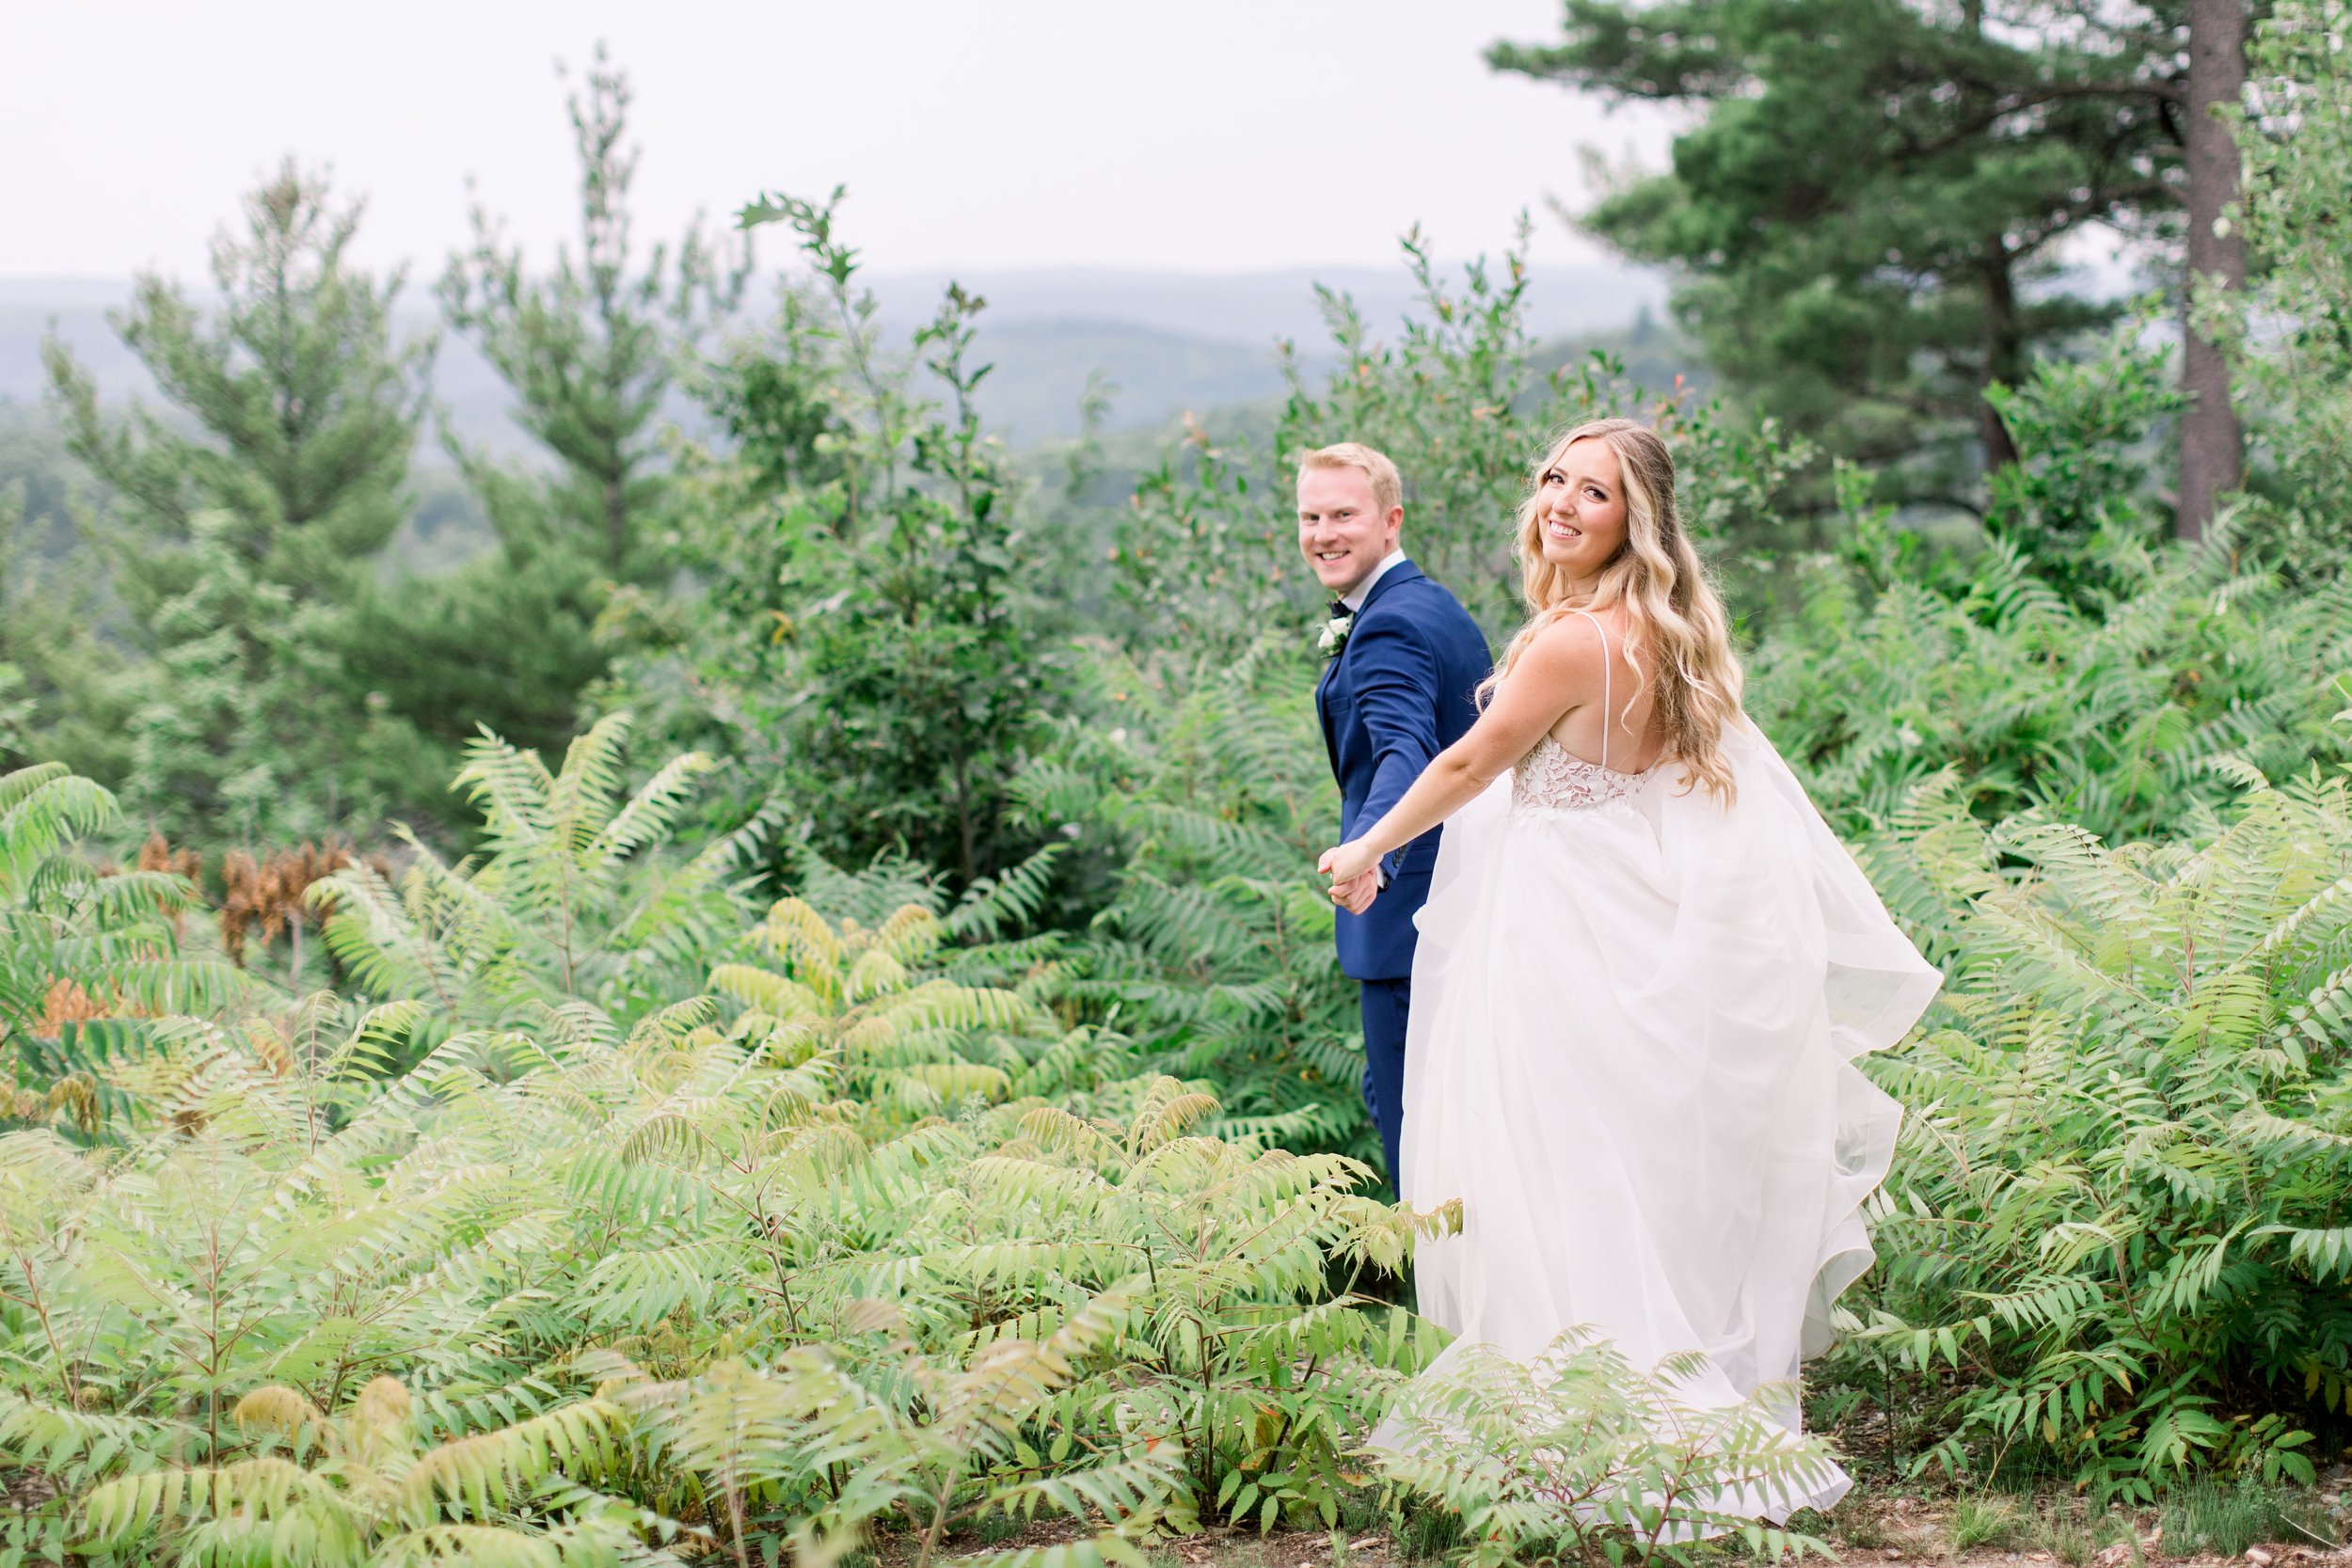  Chelsea Mason Photography captures a bride and groom escaping on an outdoor path on their wedding day. outdoor wedding portraits #Quebecweddings #elegantoutdoorwedding #Quebecweddingphotographers #Chelseamasonphotography #Chelseamasonweddings 